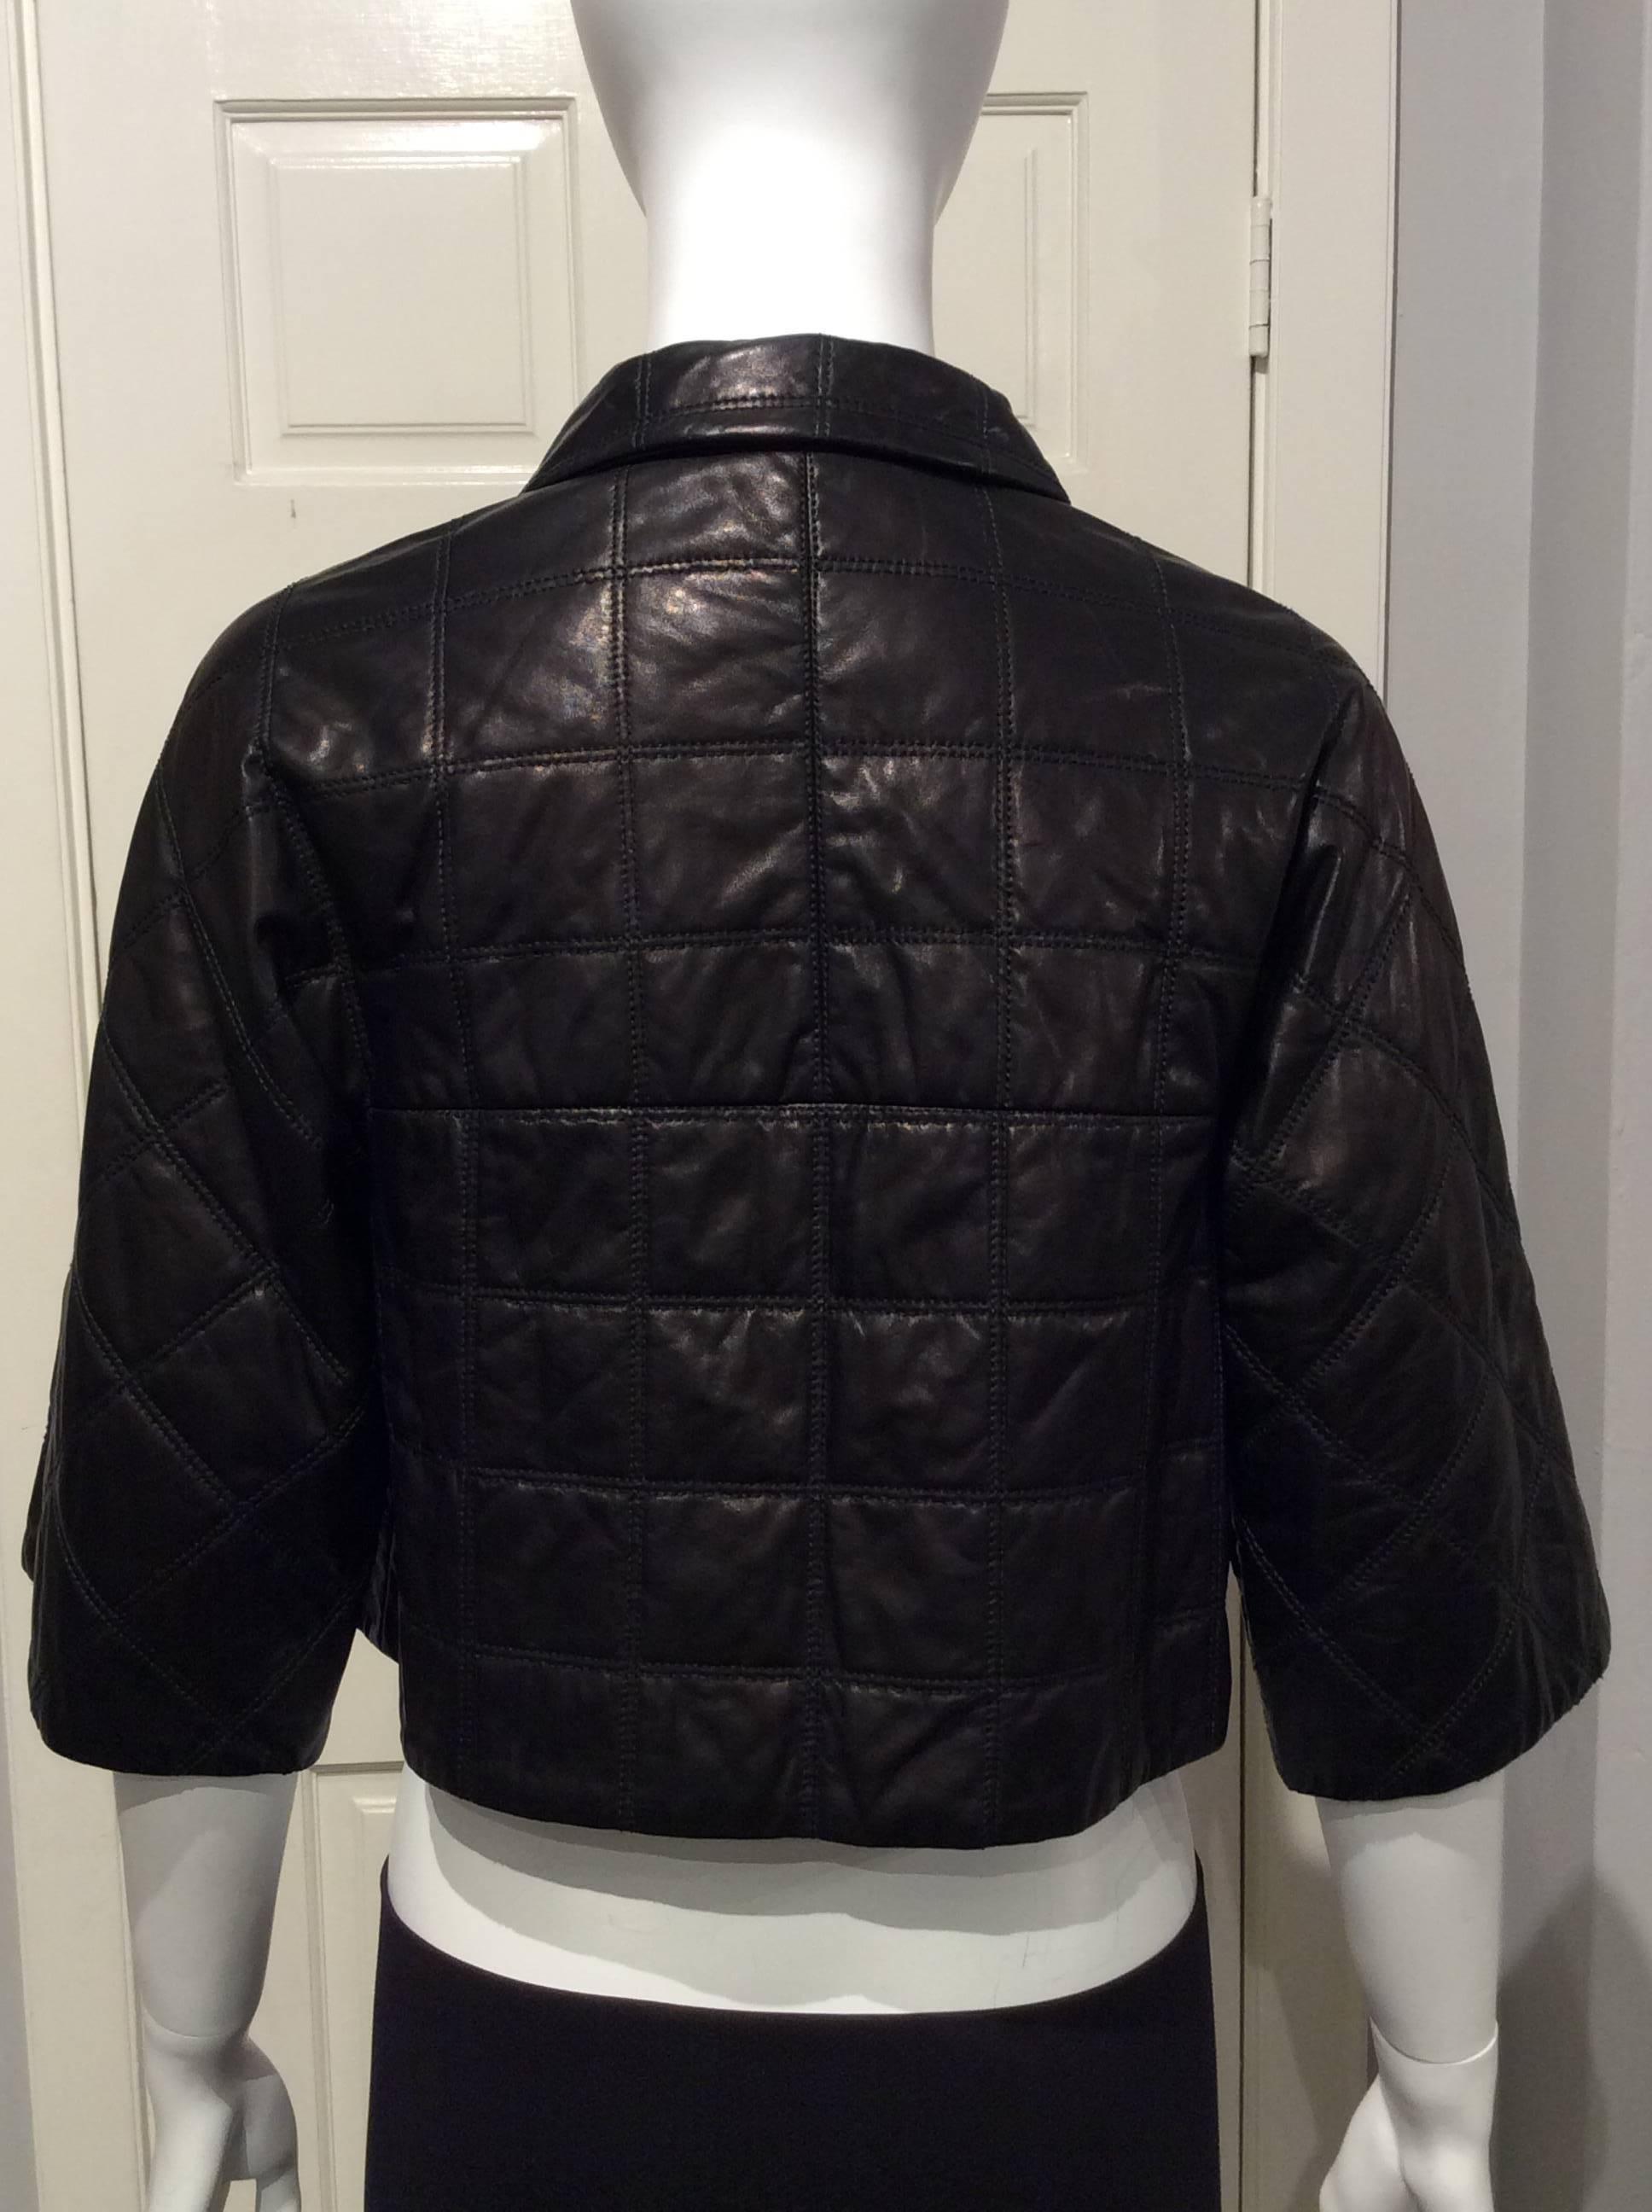 Prada Black With Quilted Pattern Leather Jacket Sz 38 (Us 2) In Excellent Condition For Sale In San Francisco, CA